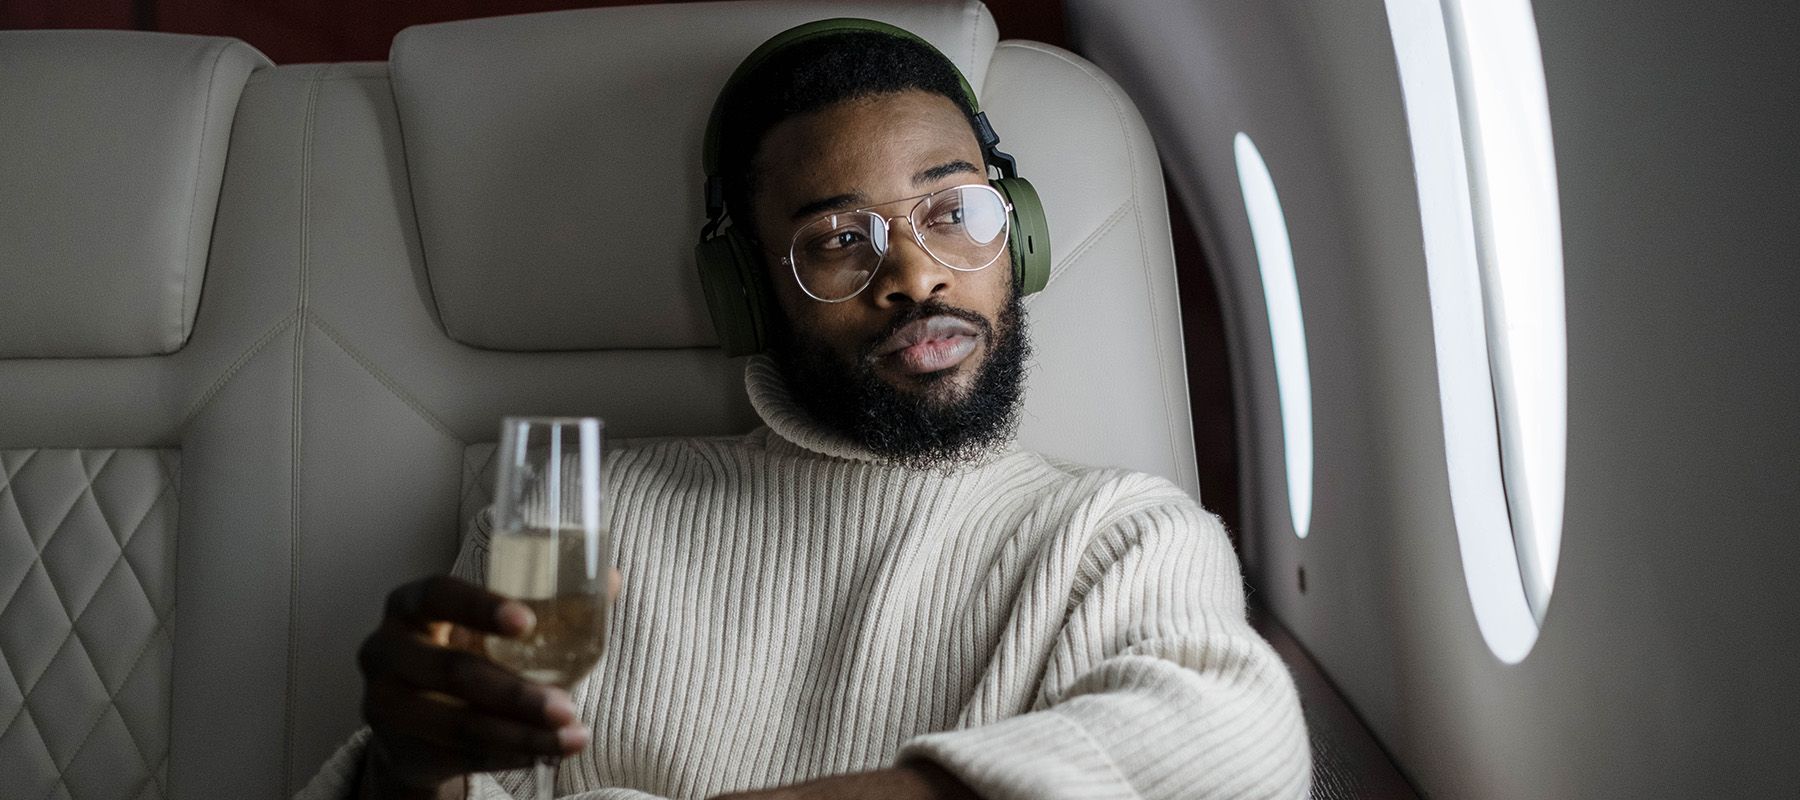 Black man sitting in first-class on plane wearing headphones looking out window holding champagne glass